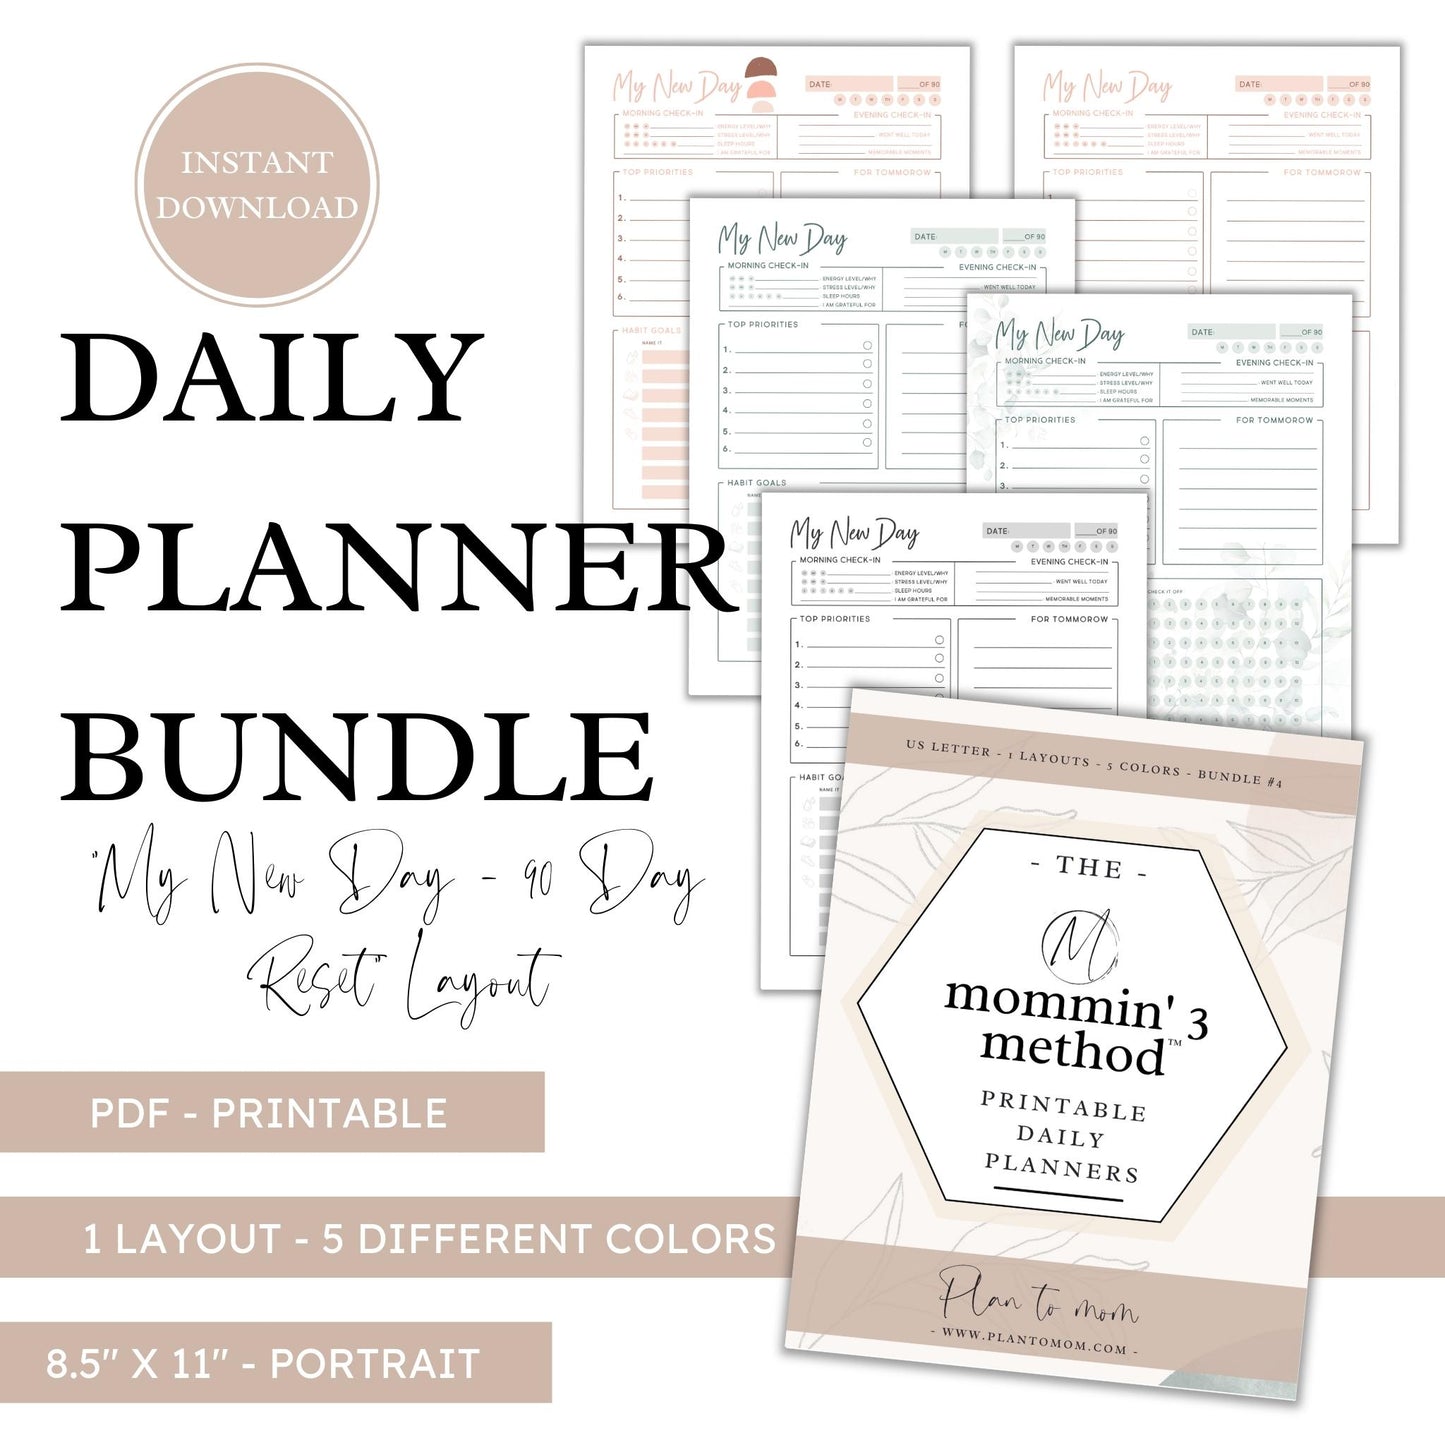 Printable Daily Planner Bundle of 5 - US LETTER COLOR - 'My New Day - 90 day reset' layout